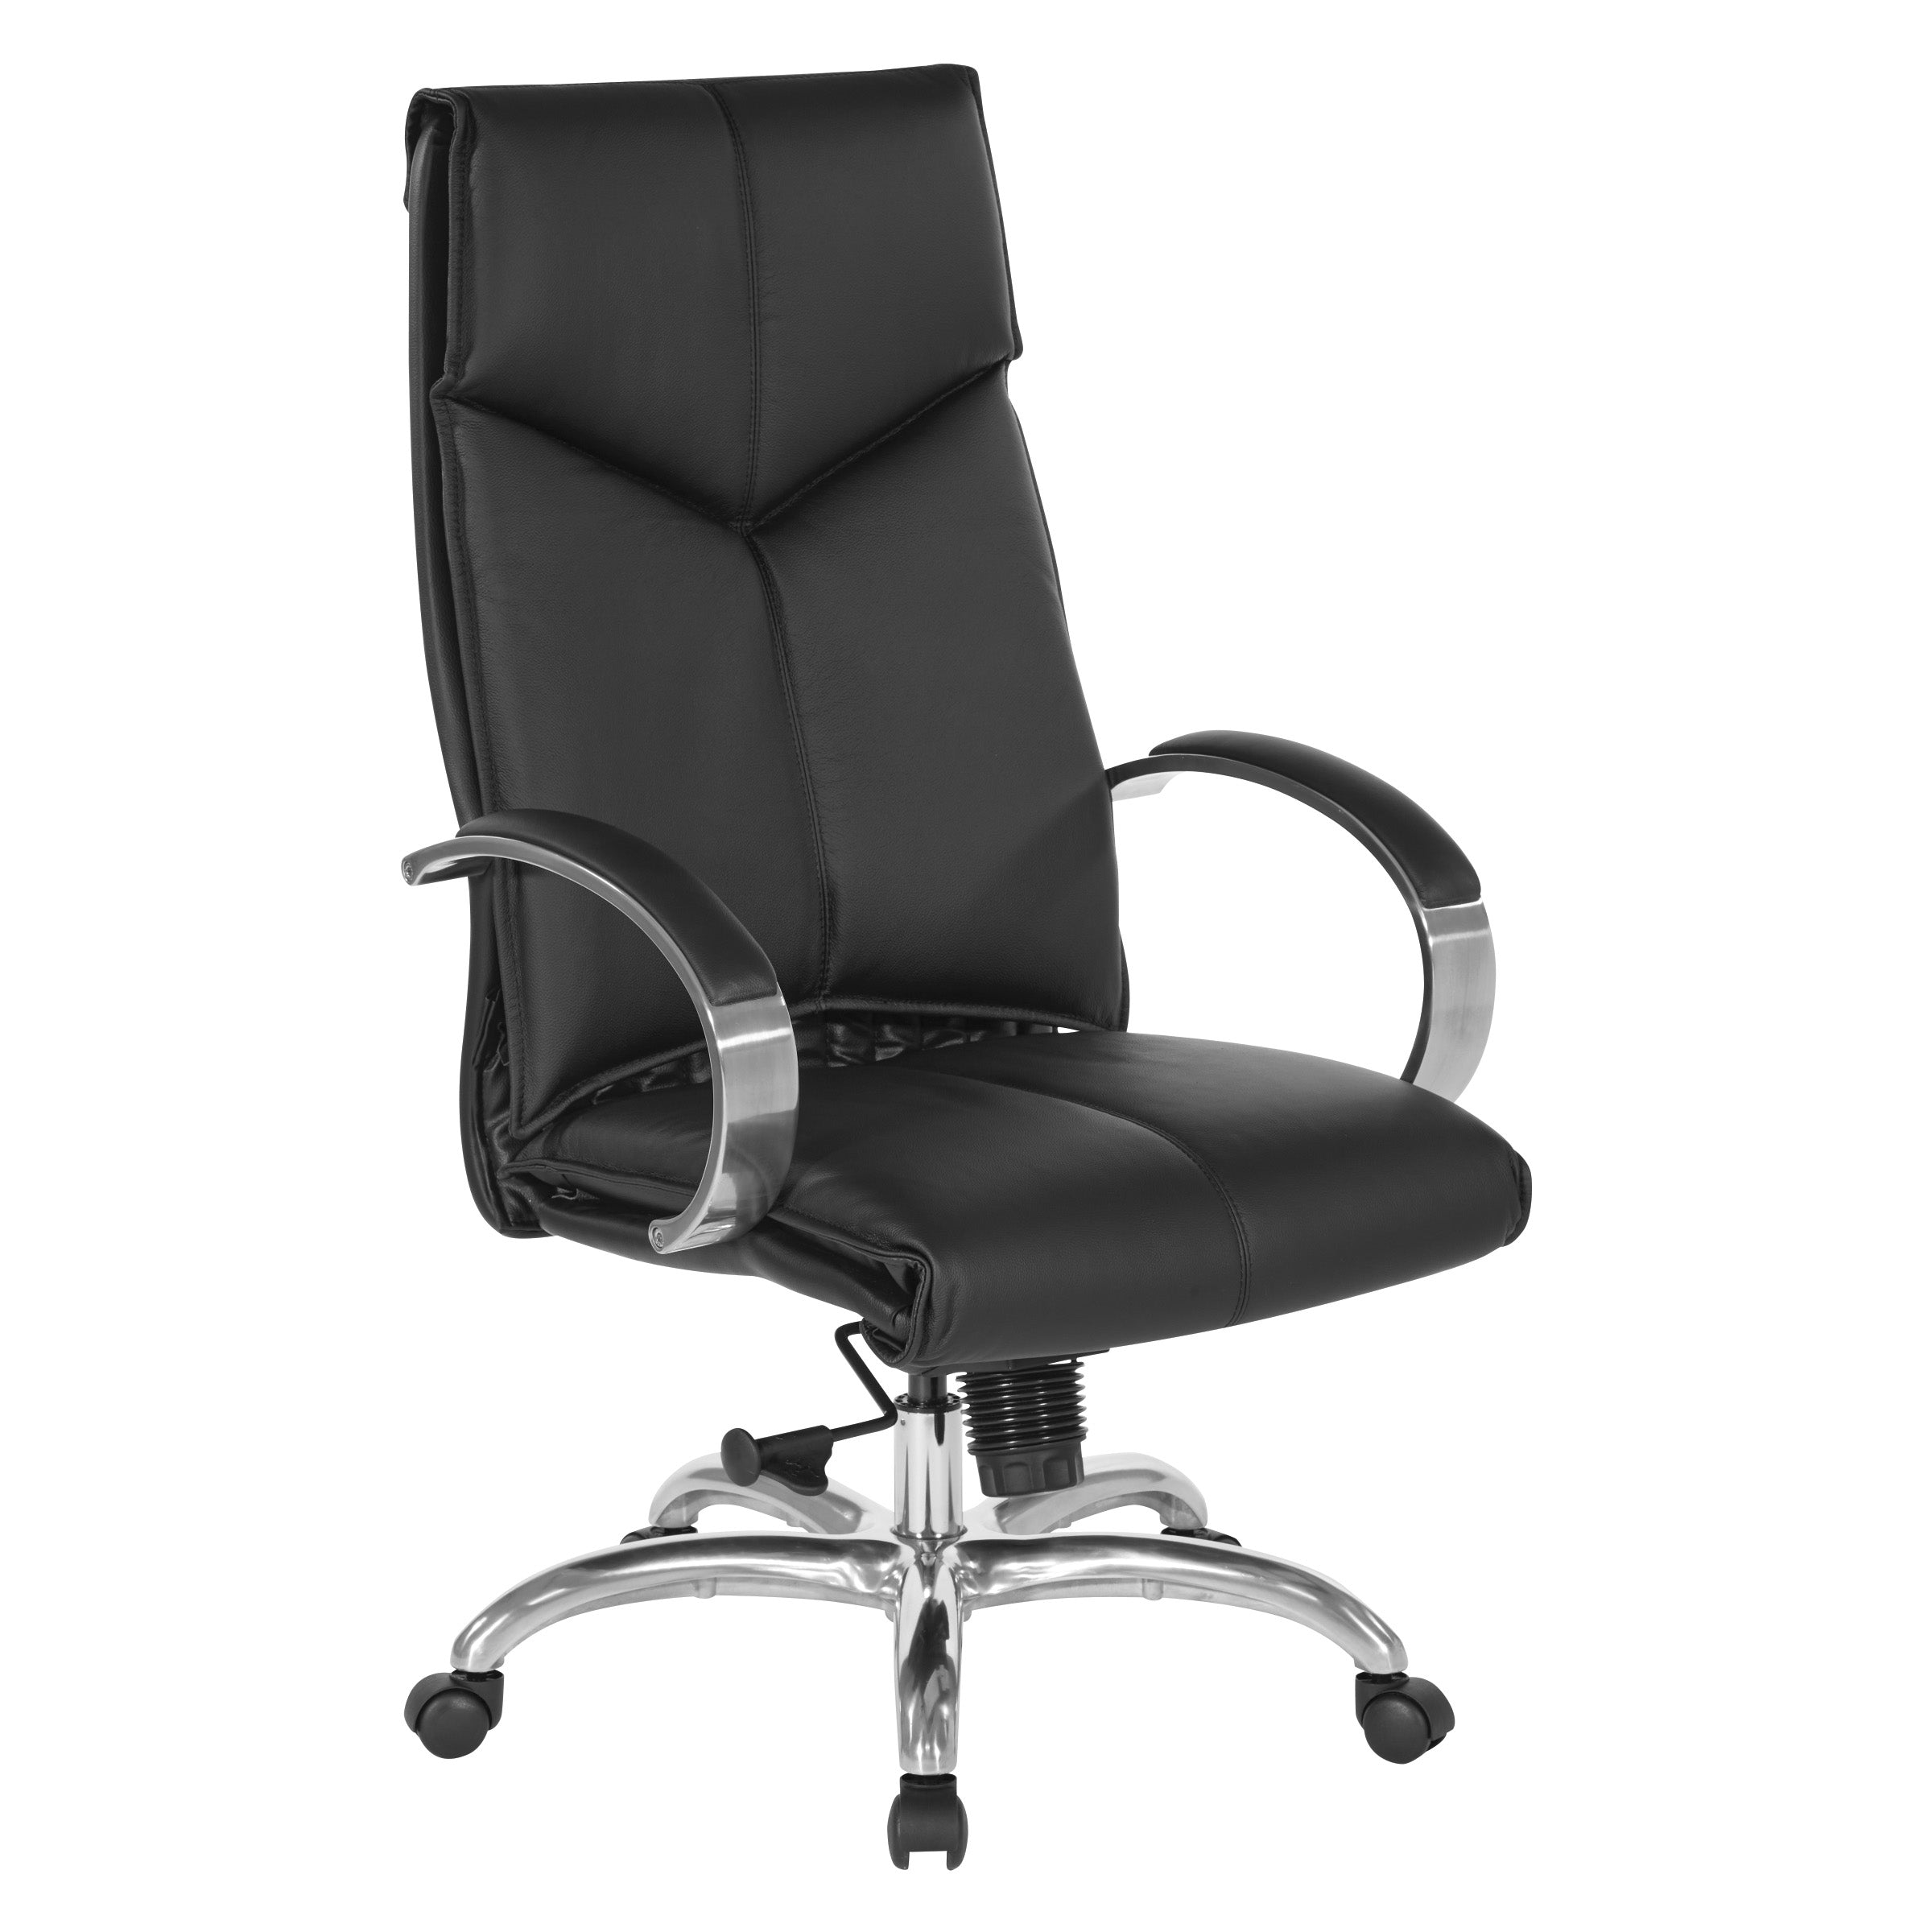 8200 - Deluxe High Back Executive Leather Chair with Chrome Base